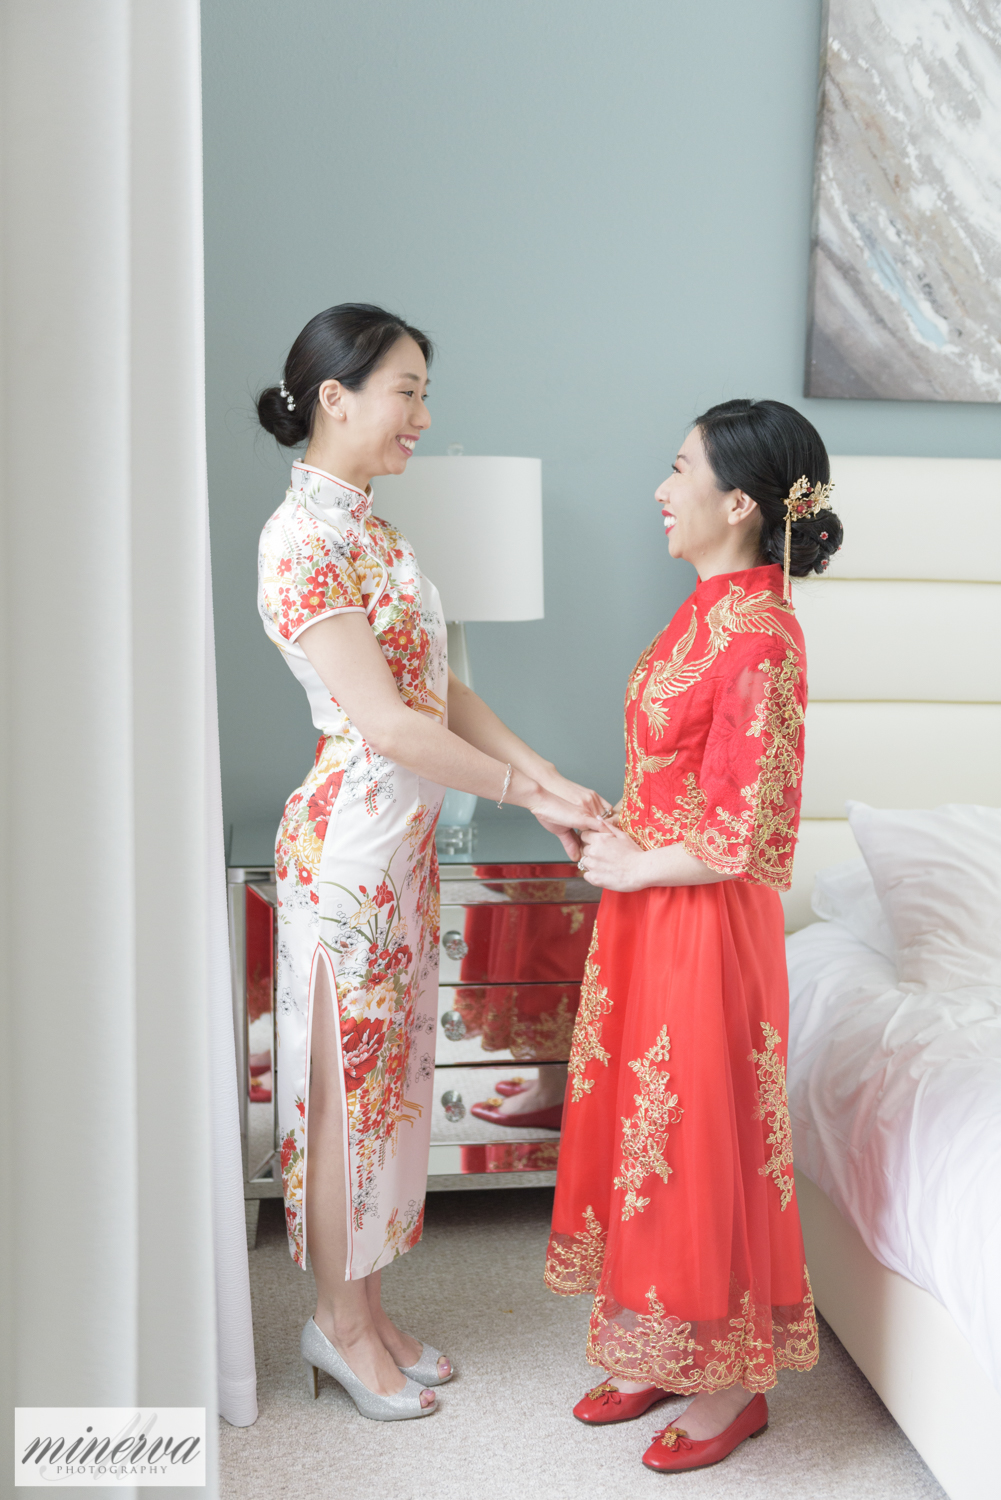 014_chinese-tea-ceremony_red-dress_four-seasons-resort-orlando_walt-disney-world_wedding_first-look_staircase_central-florida-photographer_luxury-photography